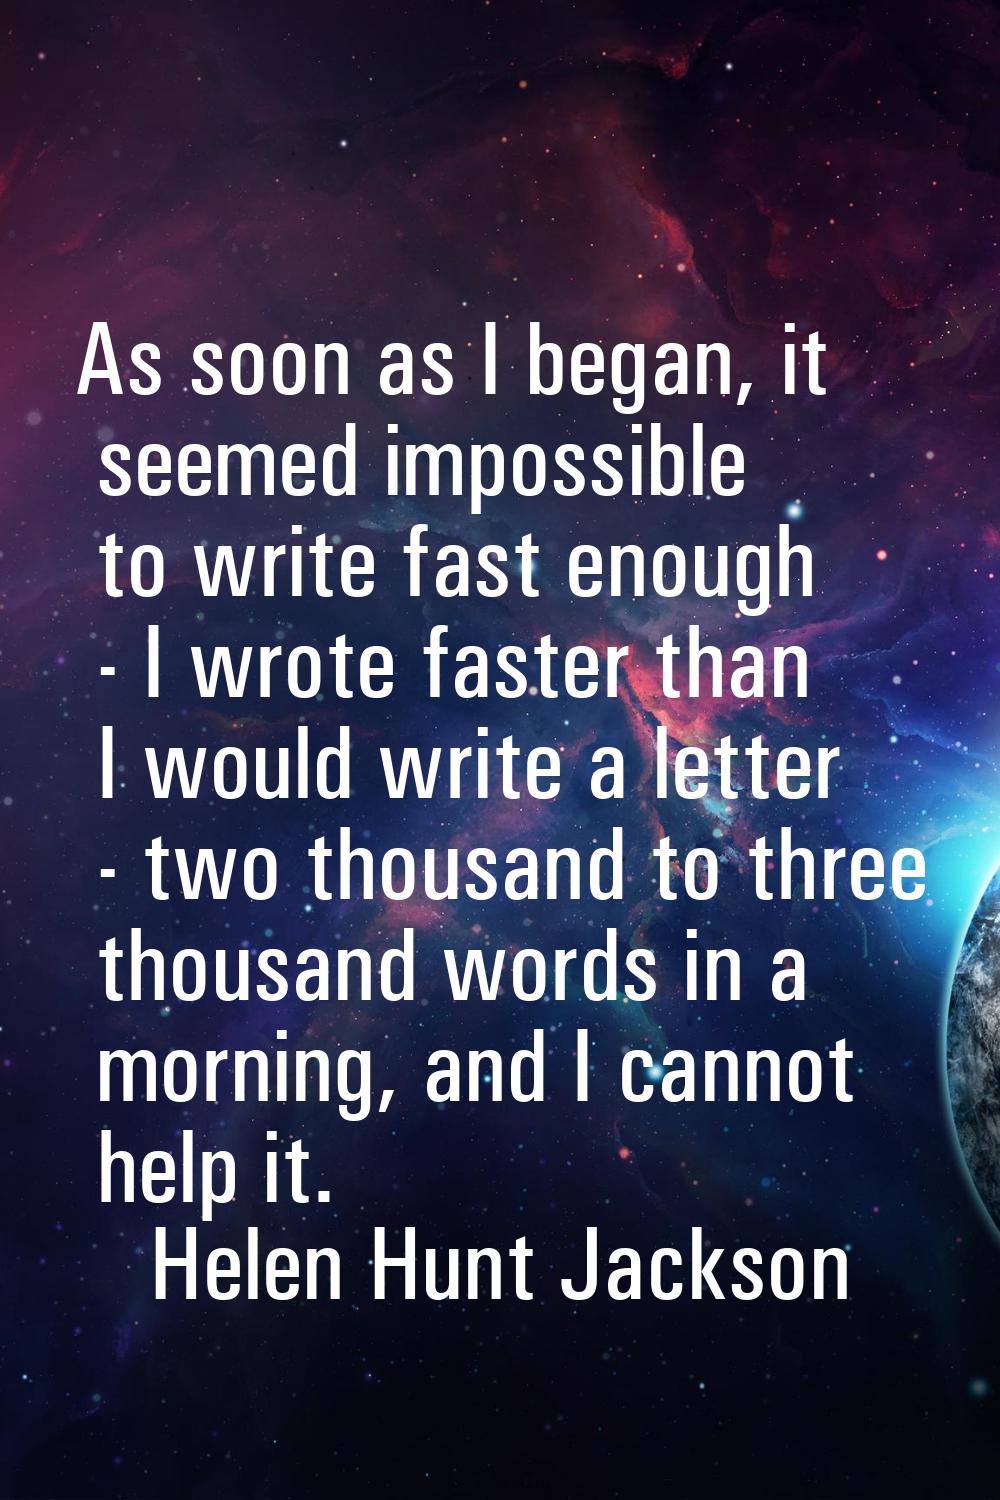 As soon as I began, it seemed impossible to write fast enough - I wrote faster than I would write a